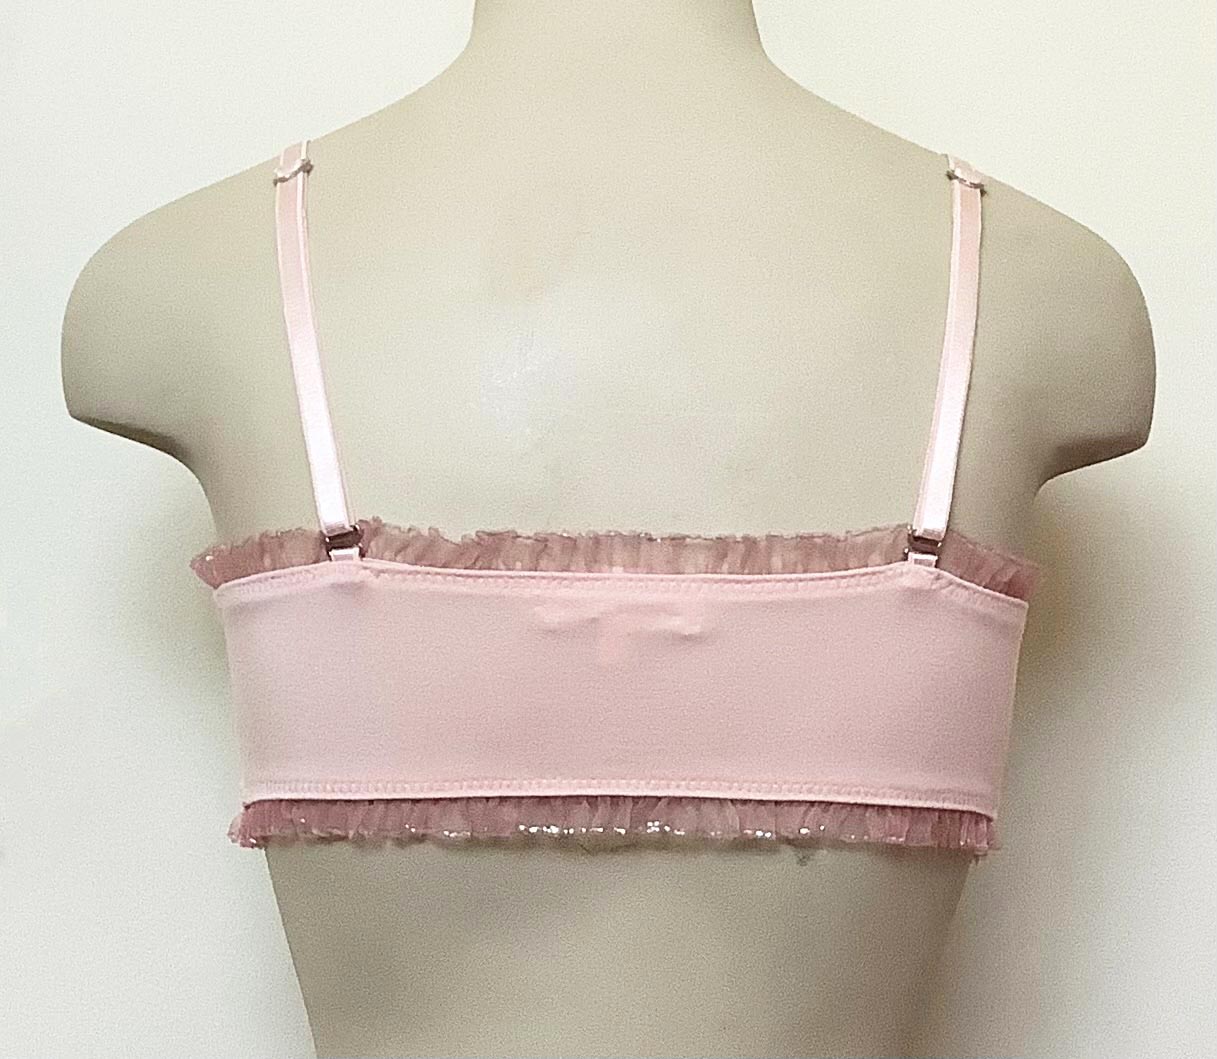 Cotton Candy / Candy Sports Bra – Sweet Glamour Boutique